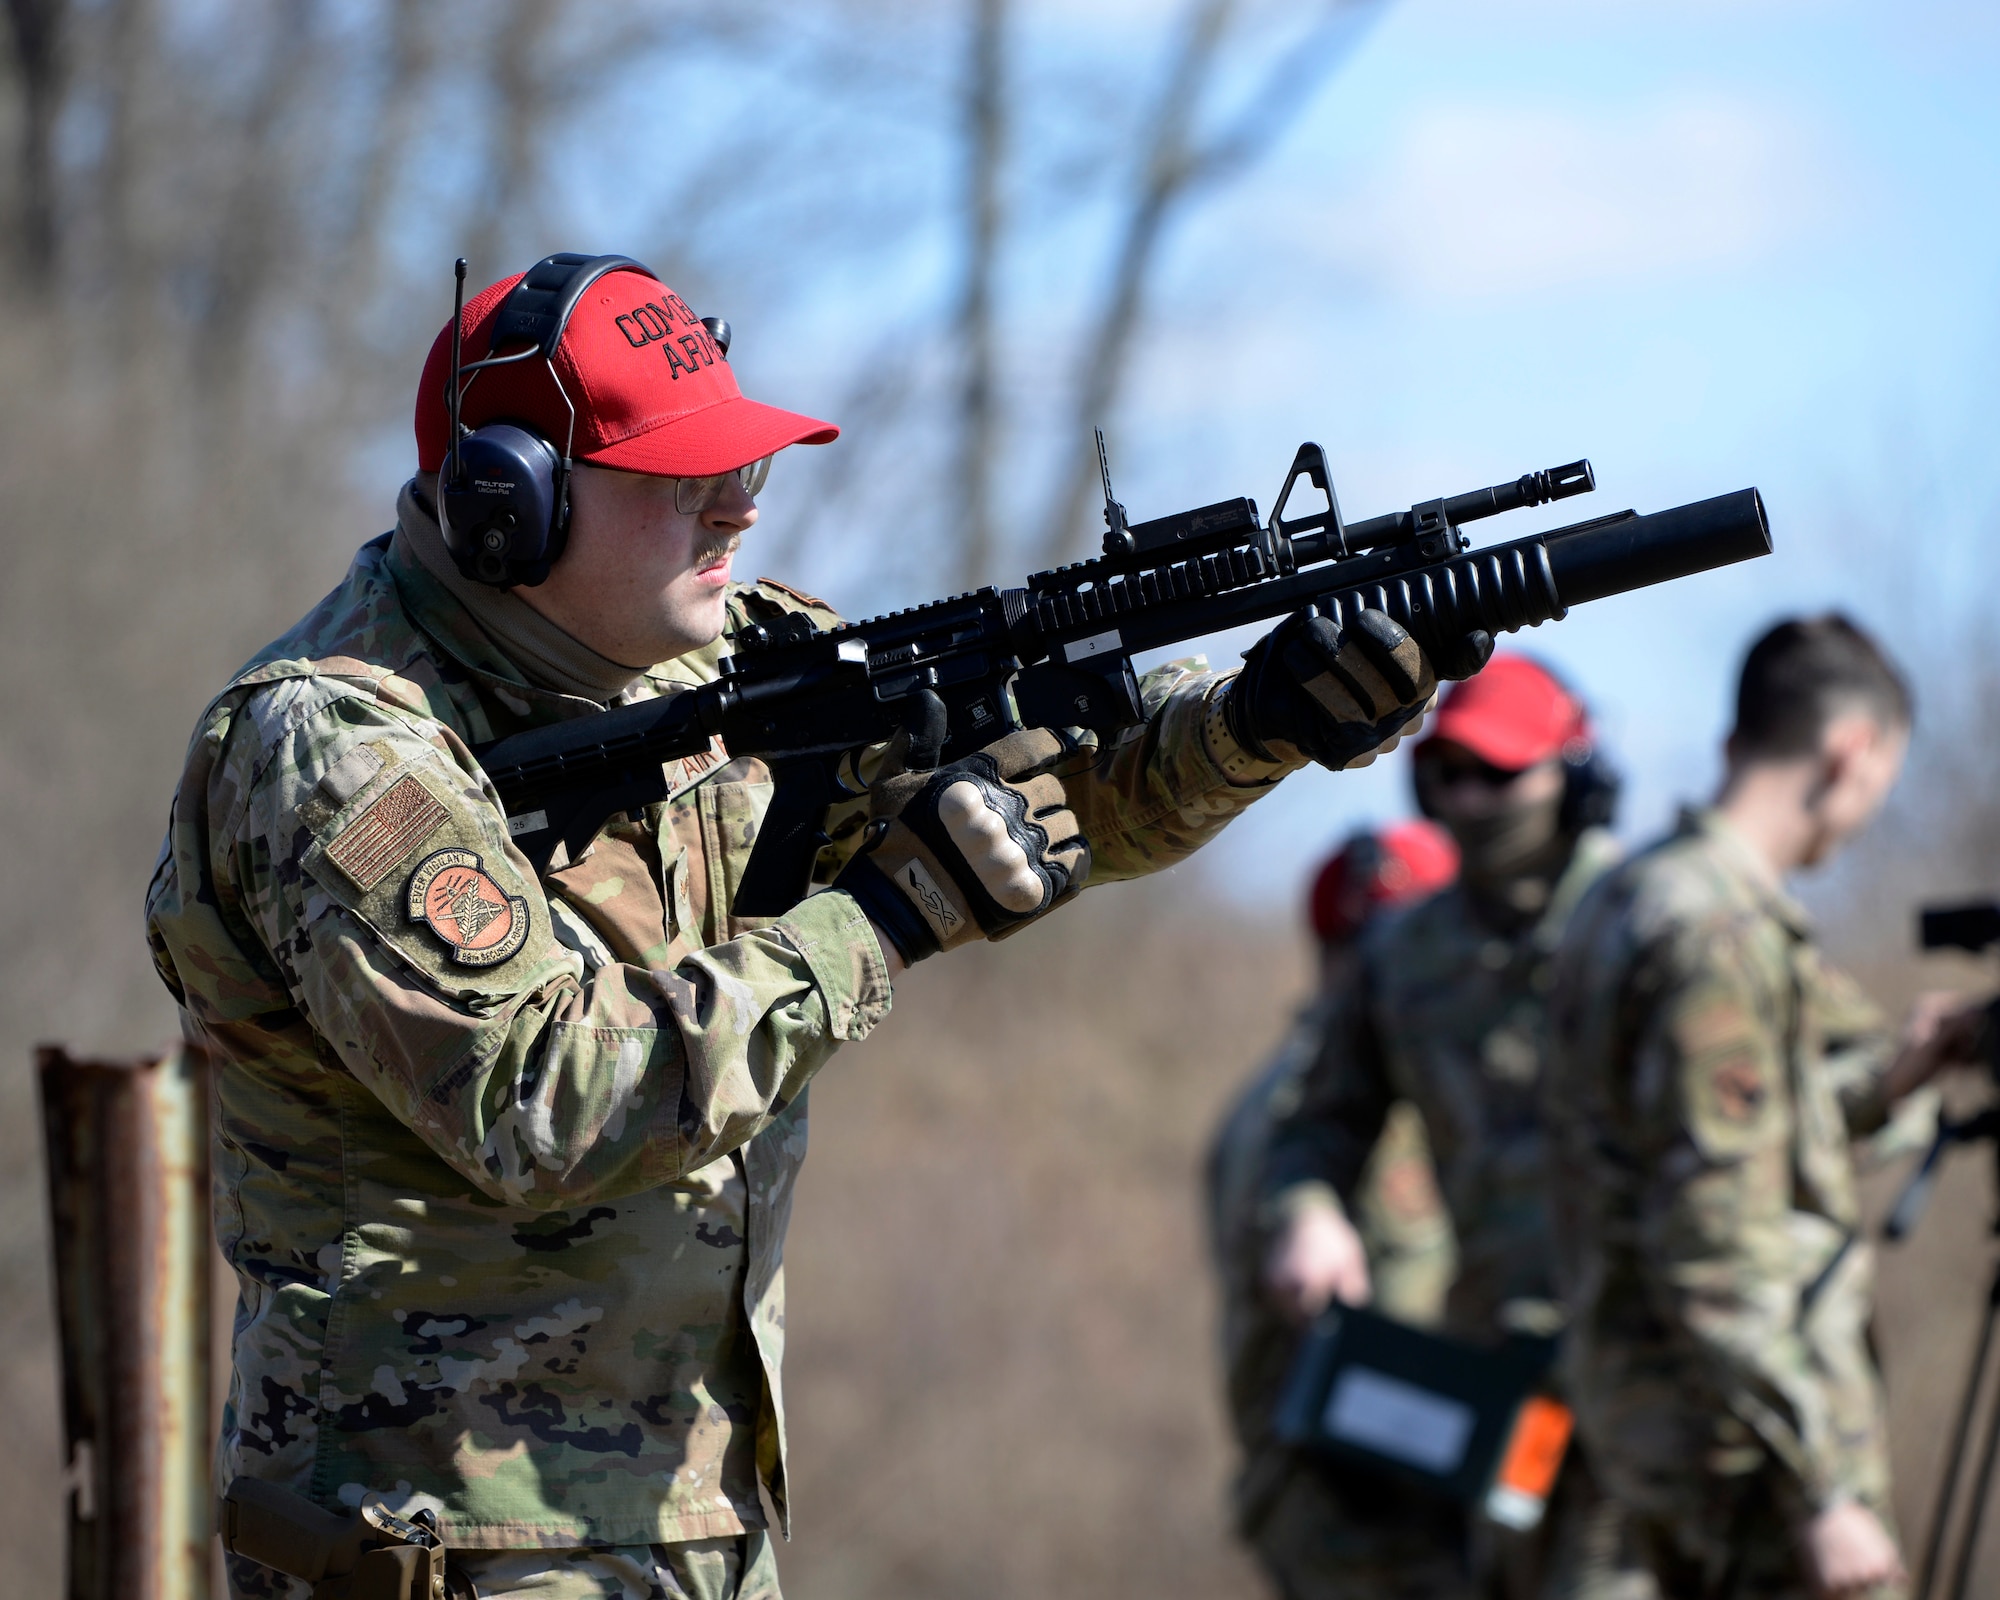 Air Force Senior Airman Clayton Nyp, an 88th Security Forces Squadron combat arms instructor, fires an M203 grenade launcher at Camp Atterbury in Edinburgh, Indiana, on Feb. 25, 2021. The combat arms instructors, from Wright-Patterson Air Force Base, Ohio, travel to Camp Atterbury multiple times each year for readiness and qualification training with deployers on machine guns and grenade launchers. (U.S. Air Force photo by Ty Greenlees)